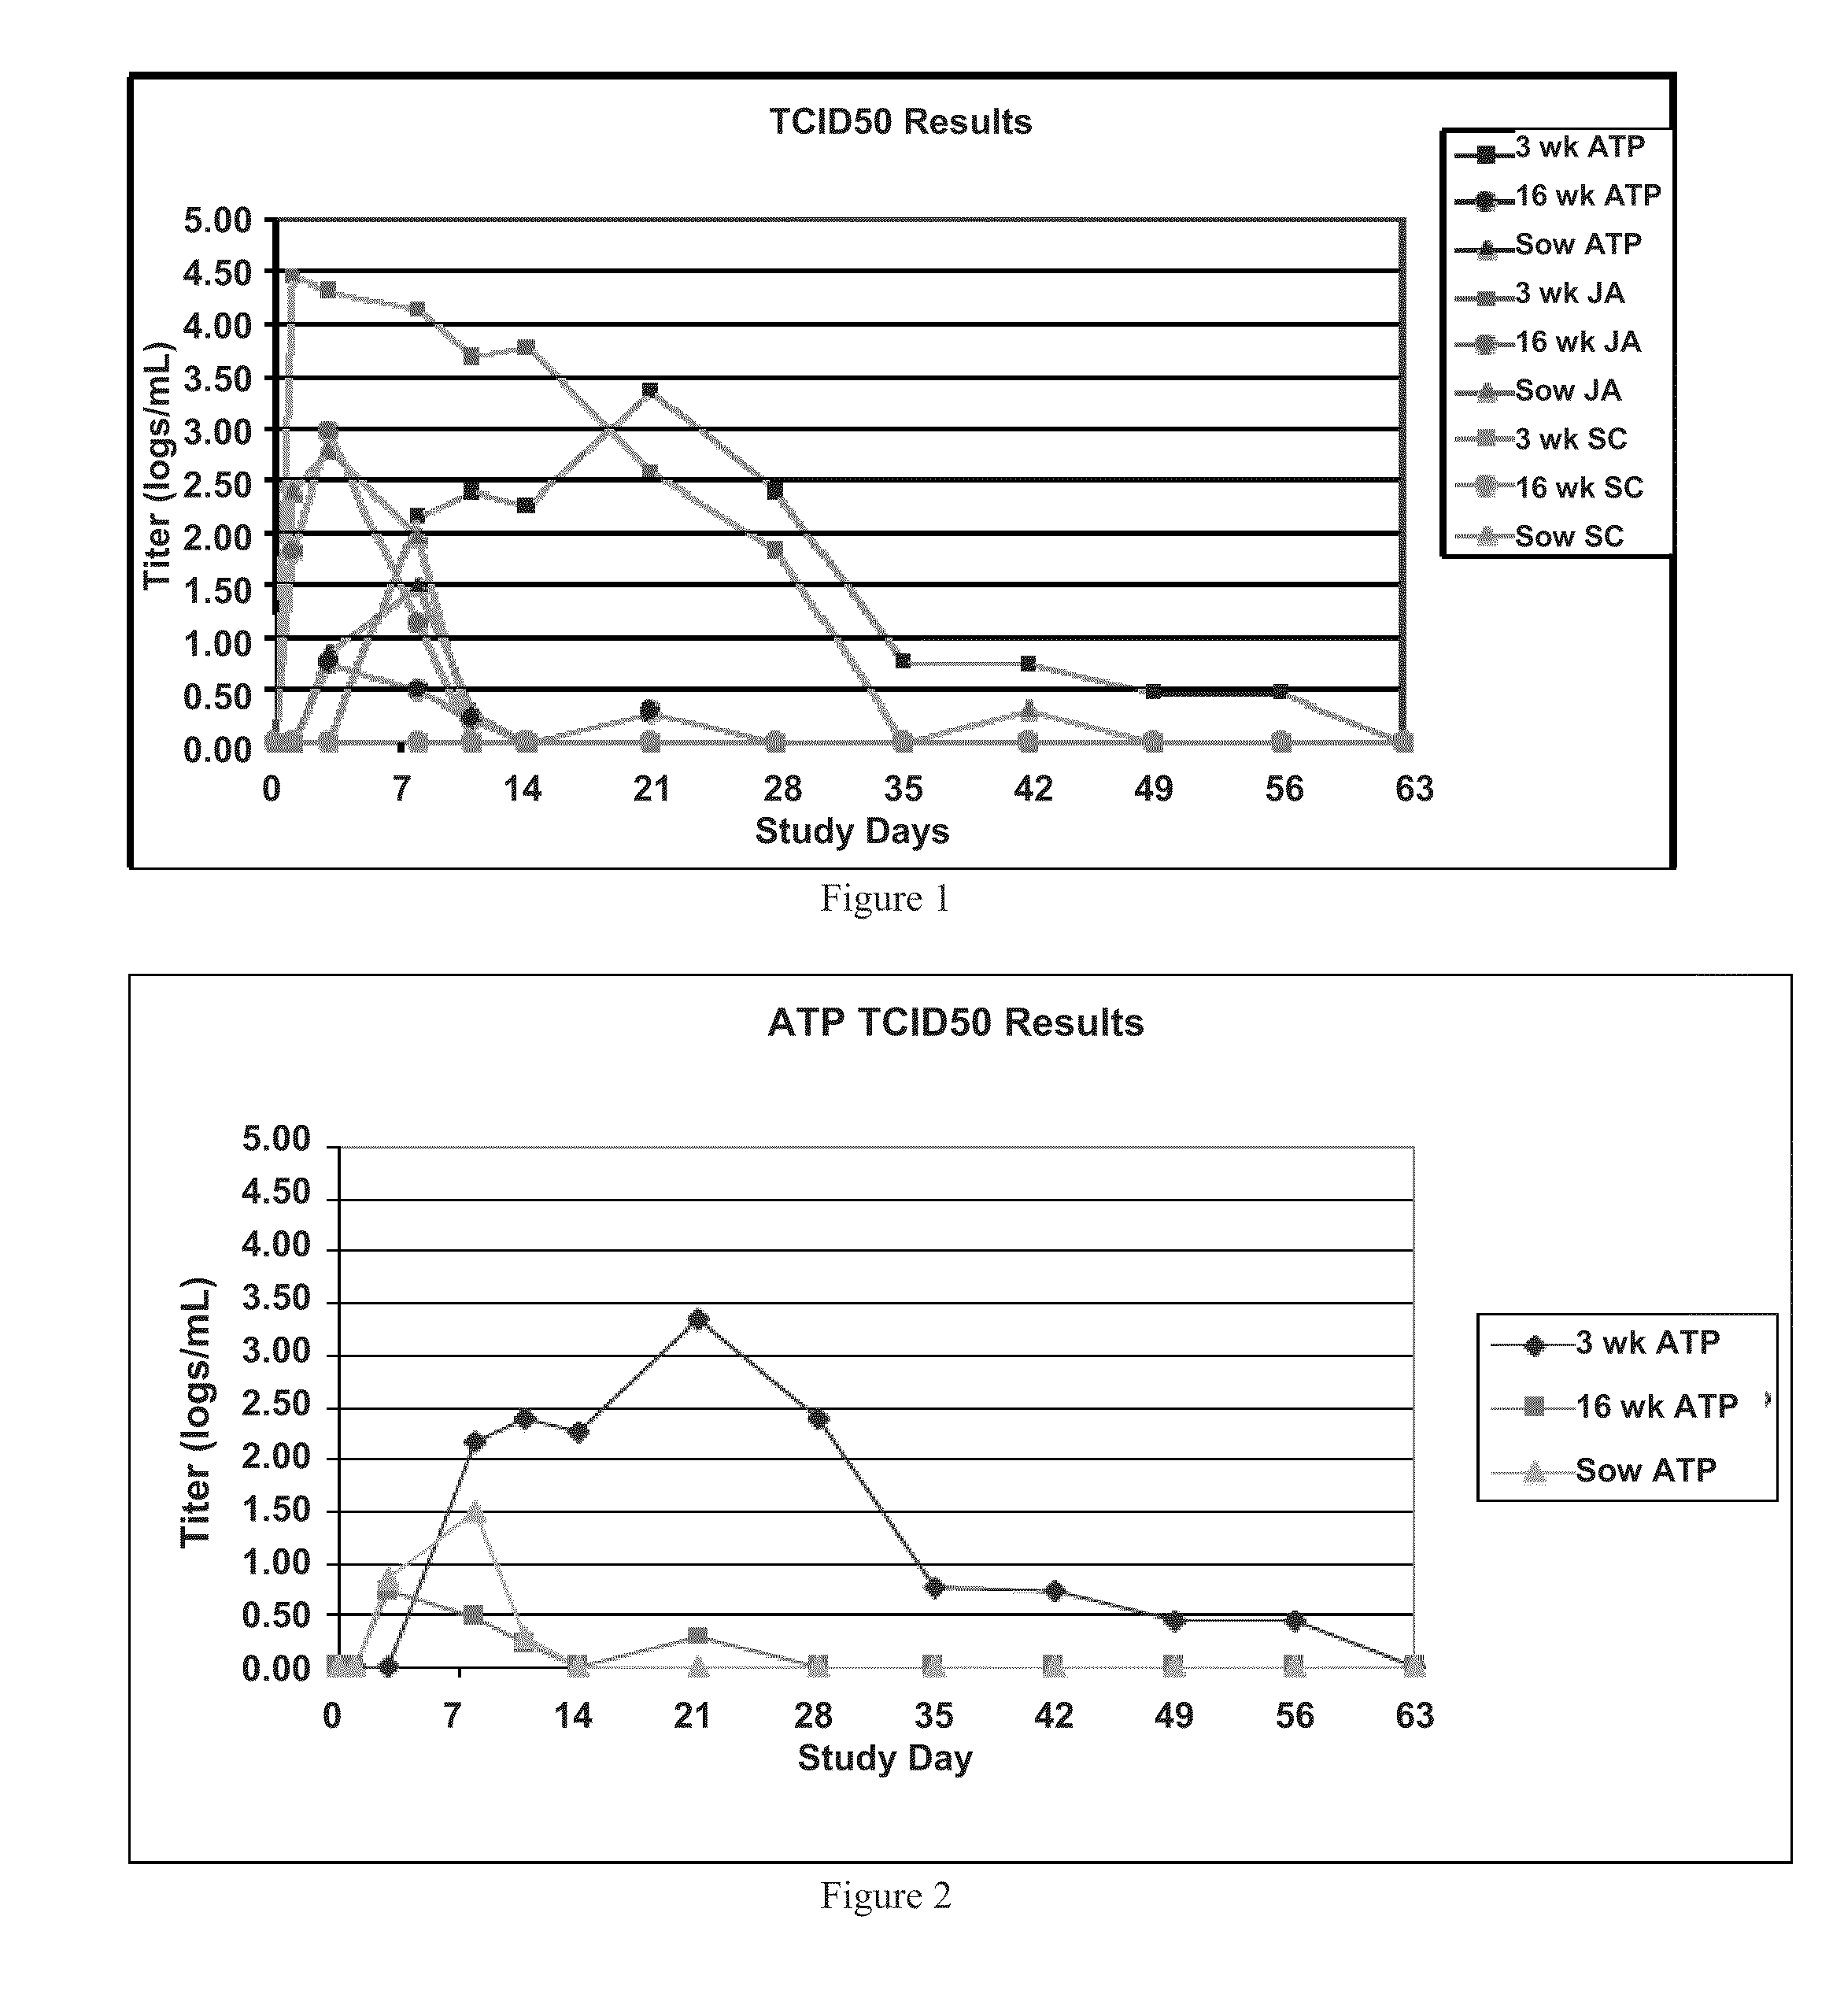 Materials and Methods for Control of Porcine Reproductive and Respiratory Syndrome